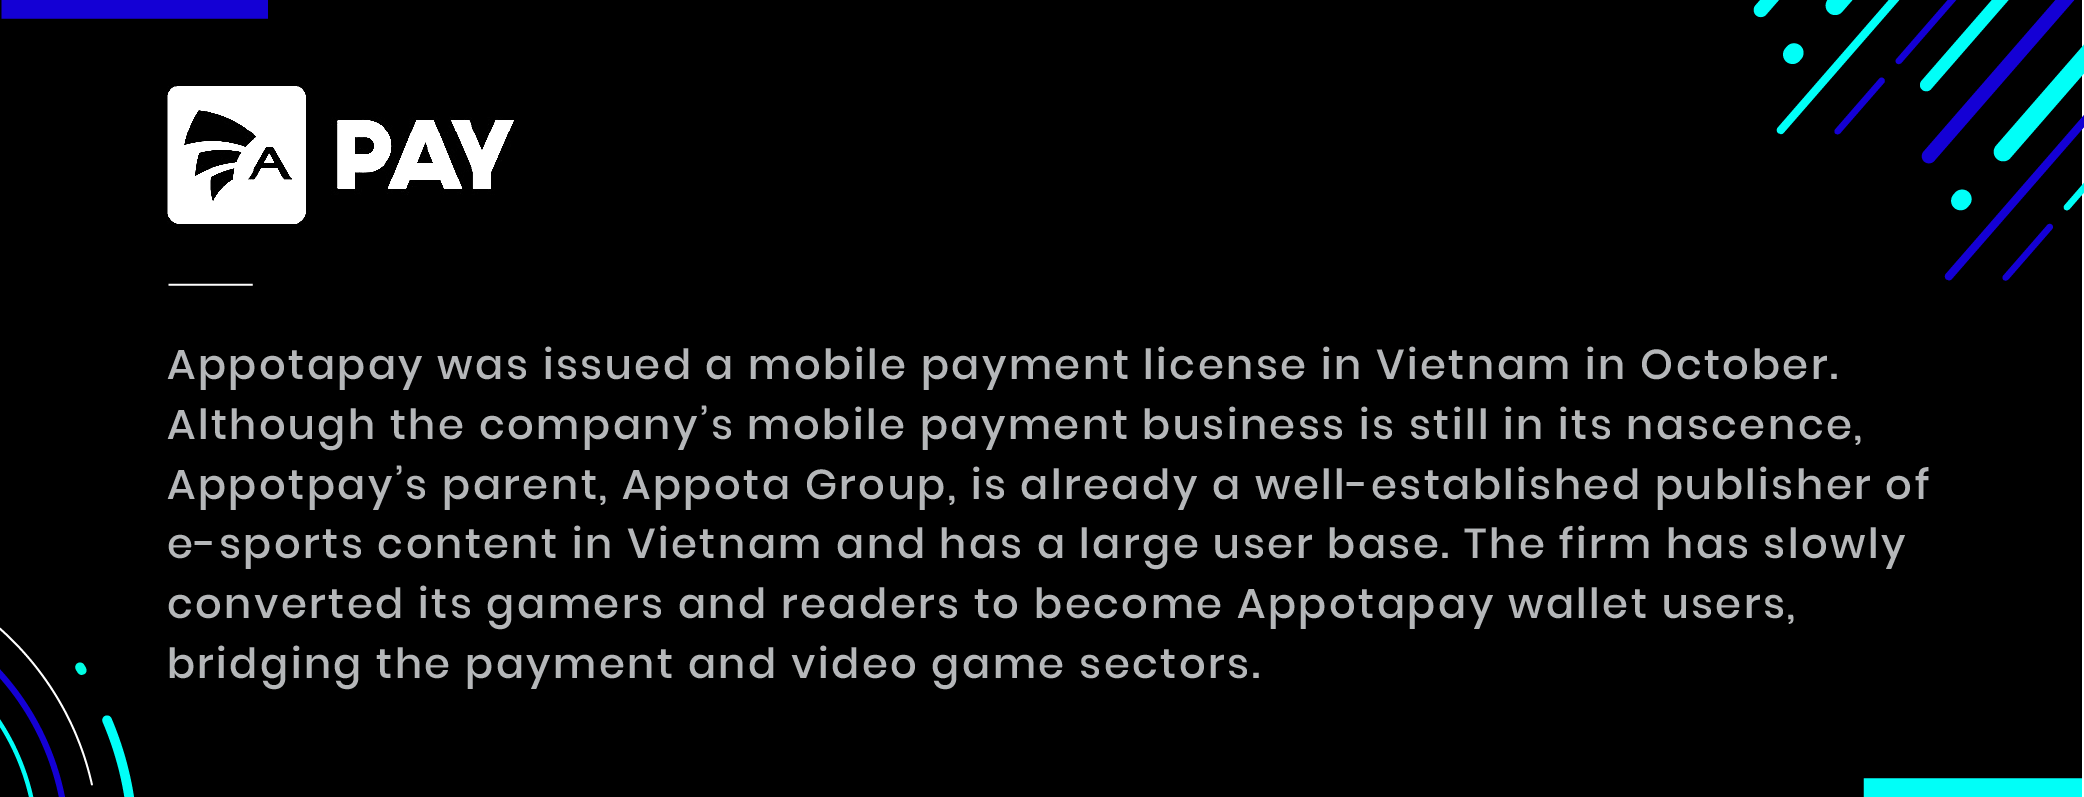 Appotapay mobile payment license vietnam appota group esports content convert gamers readers wallet users bridging sectors